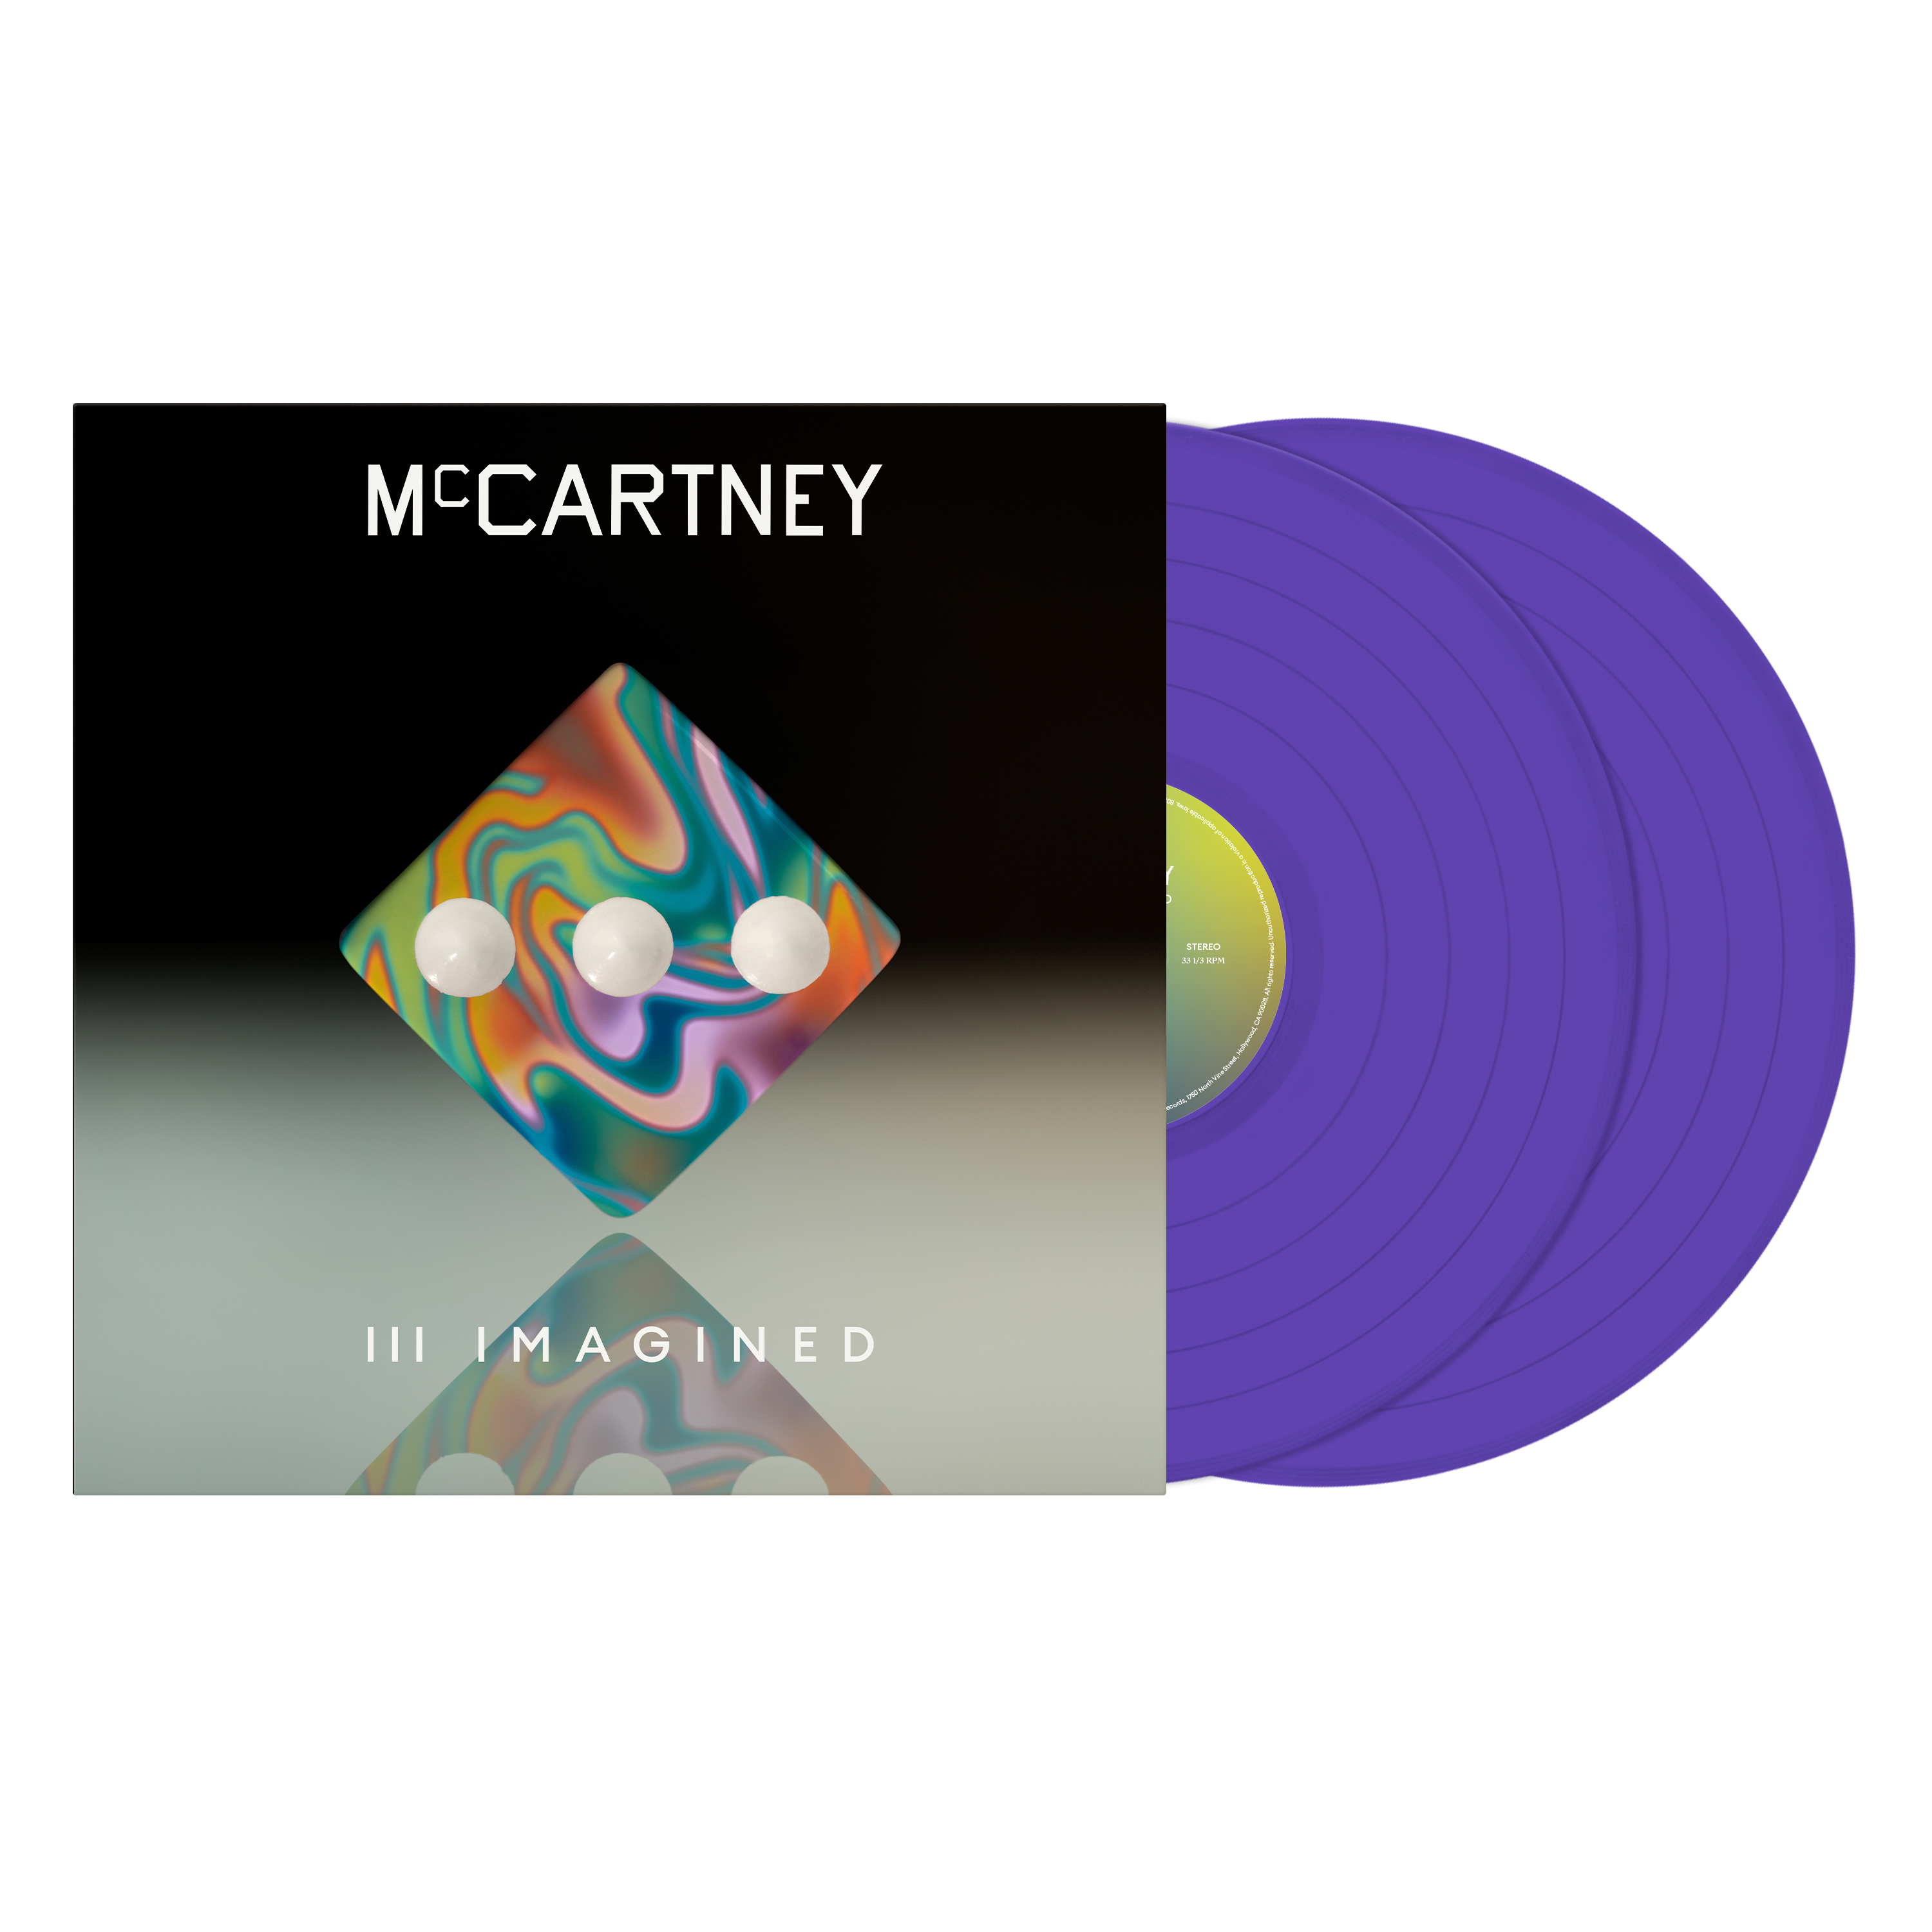 Paul McCartney, Wings - McCartney III Imagined - Limited Edition Exclusive Violet 2LP